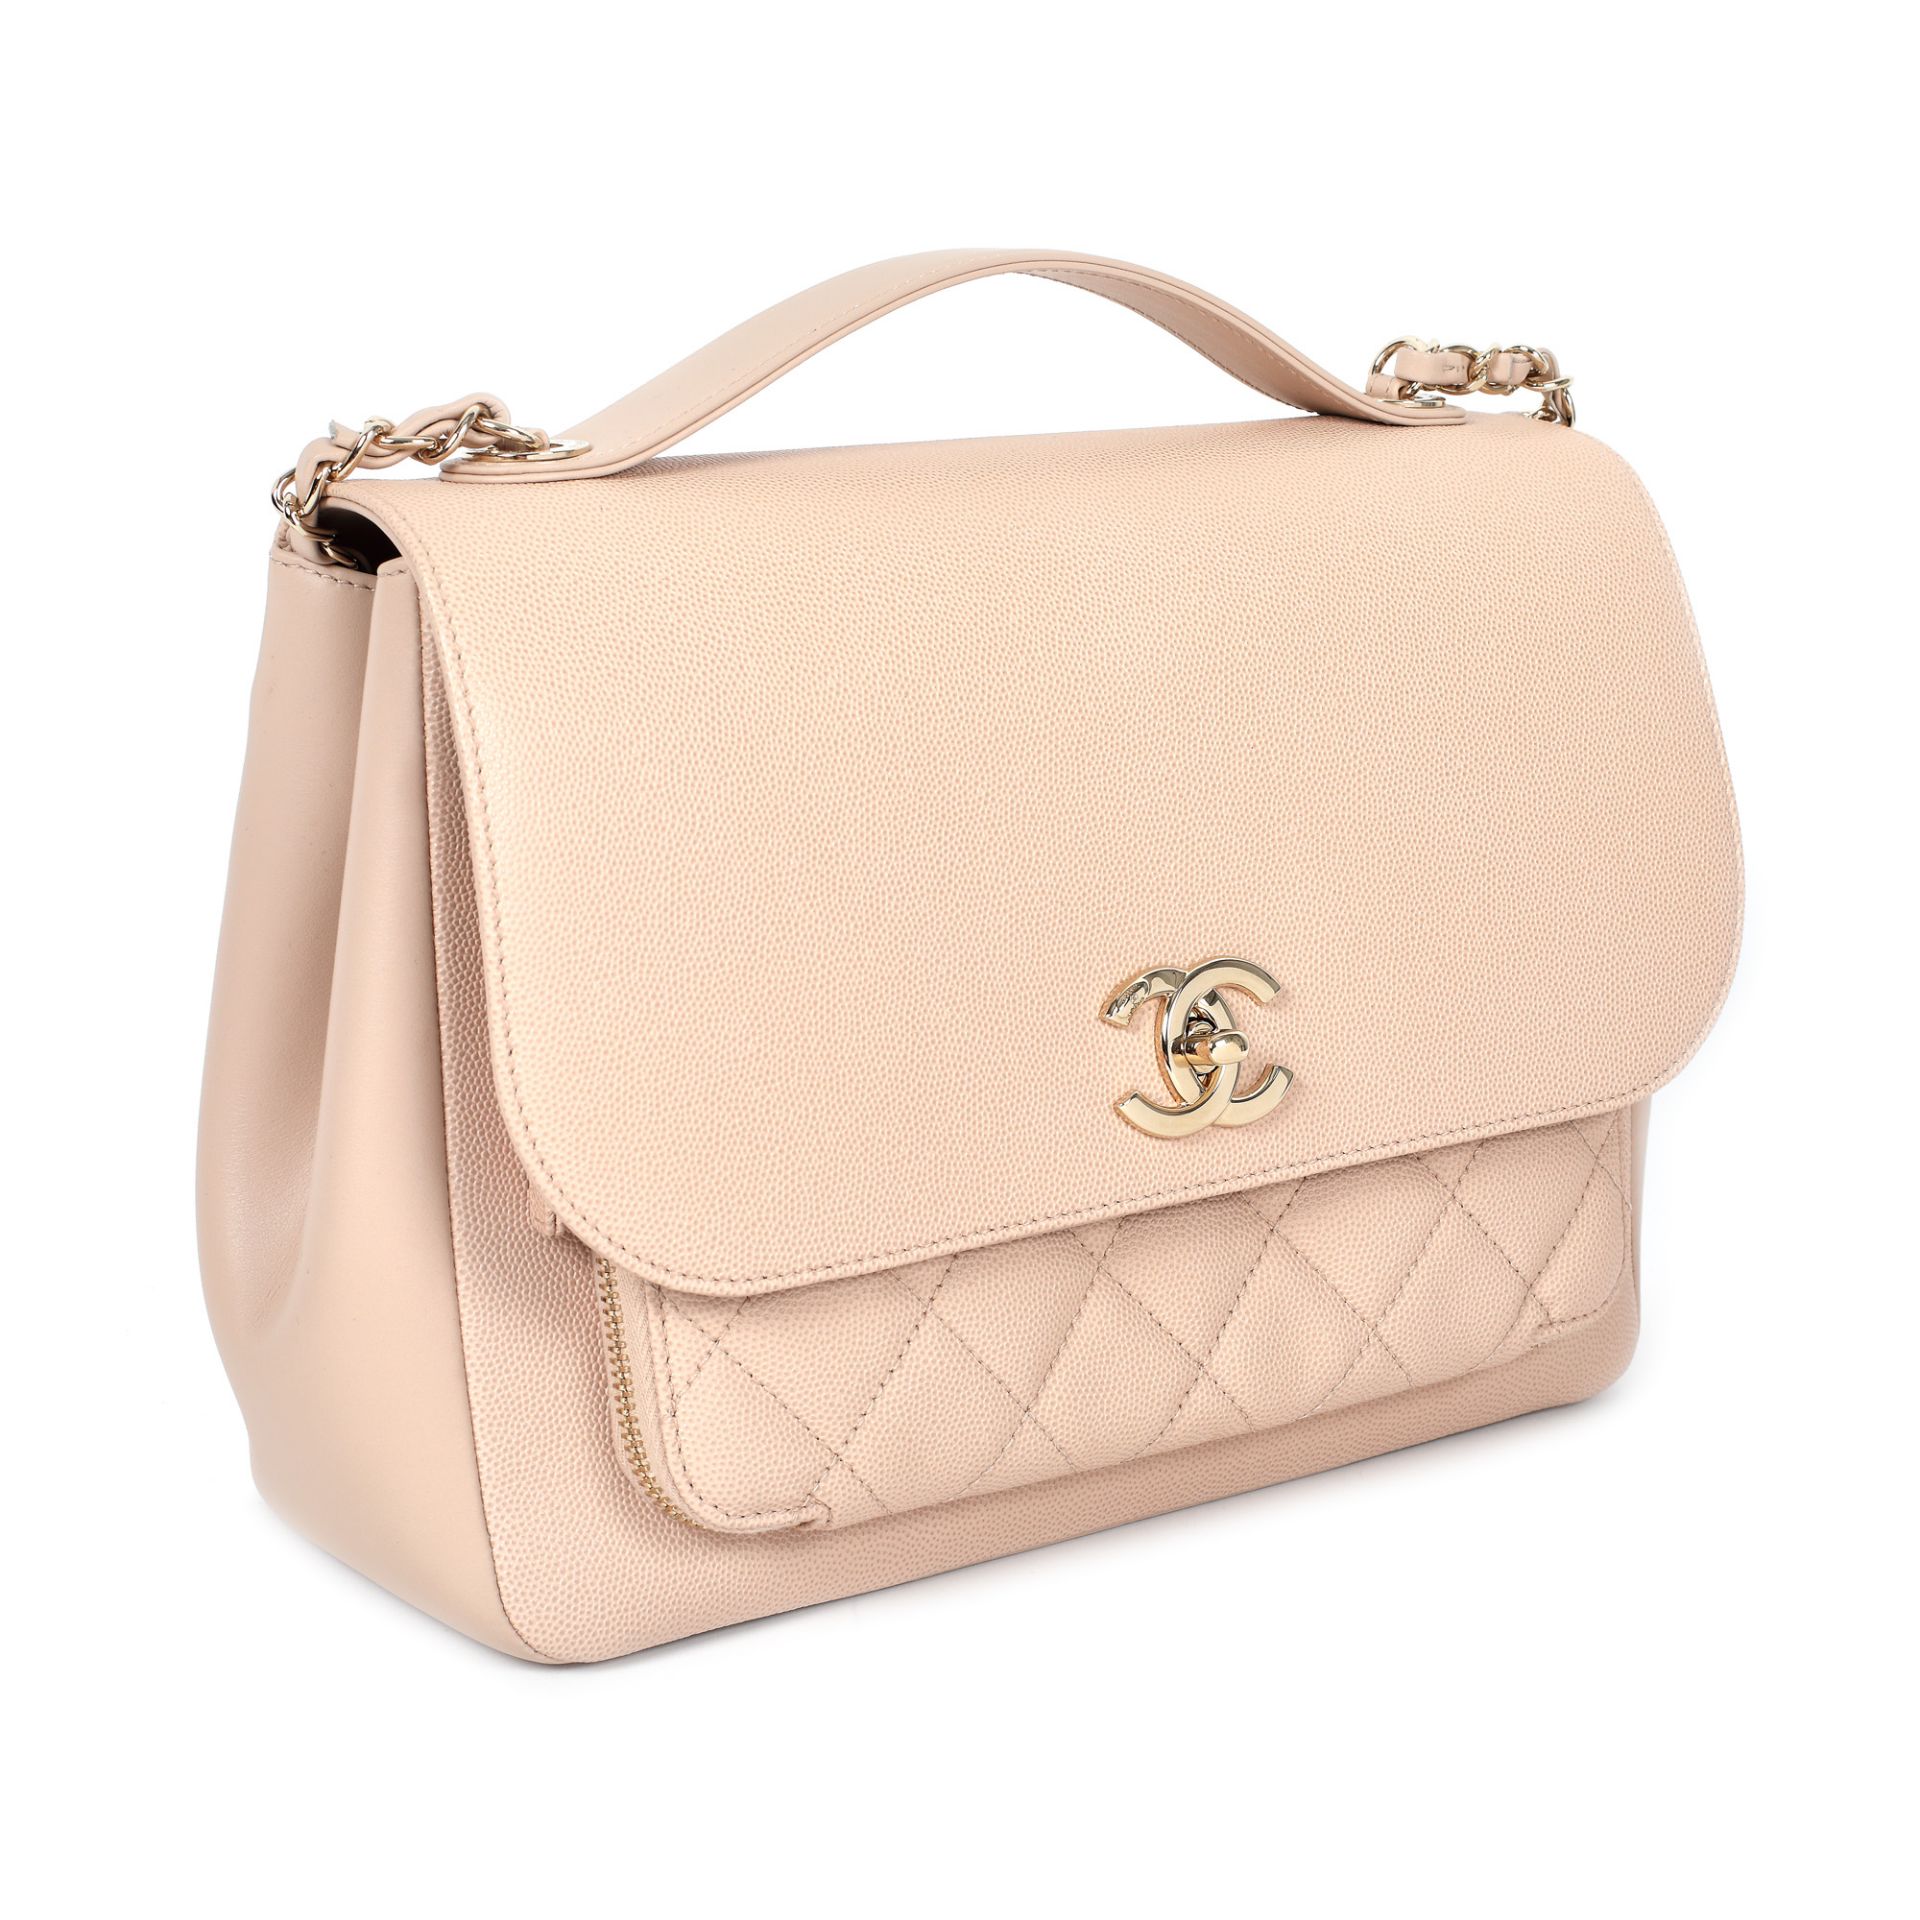 "Business Affinity Flap Bag" - Chanel bag, partially quilted Caviar leather, beige - Image 2 of 4